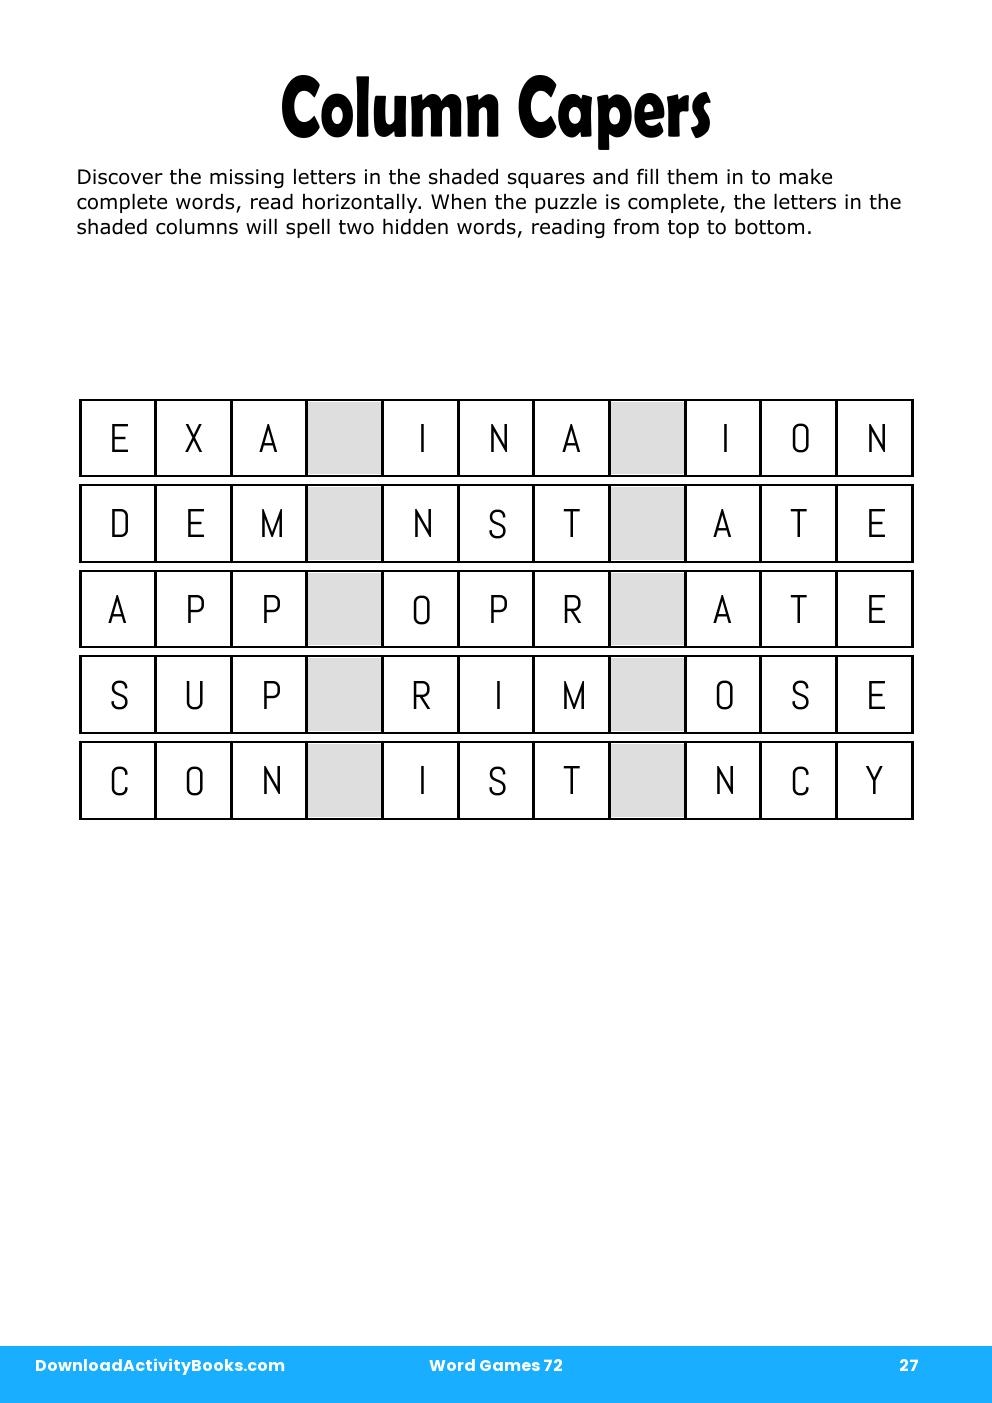 Column Capers in Word Games 72